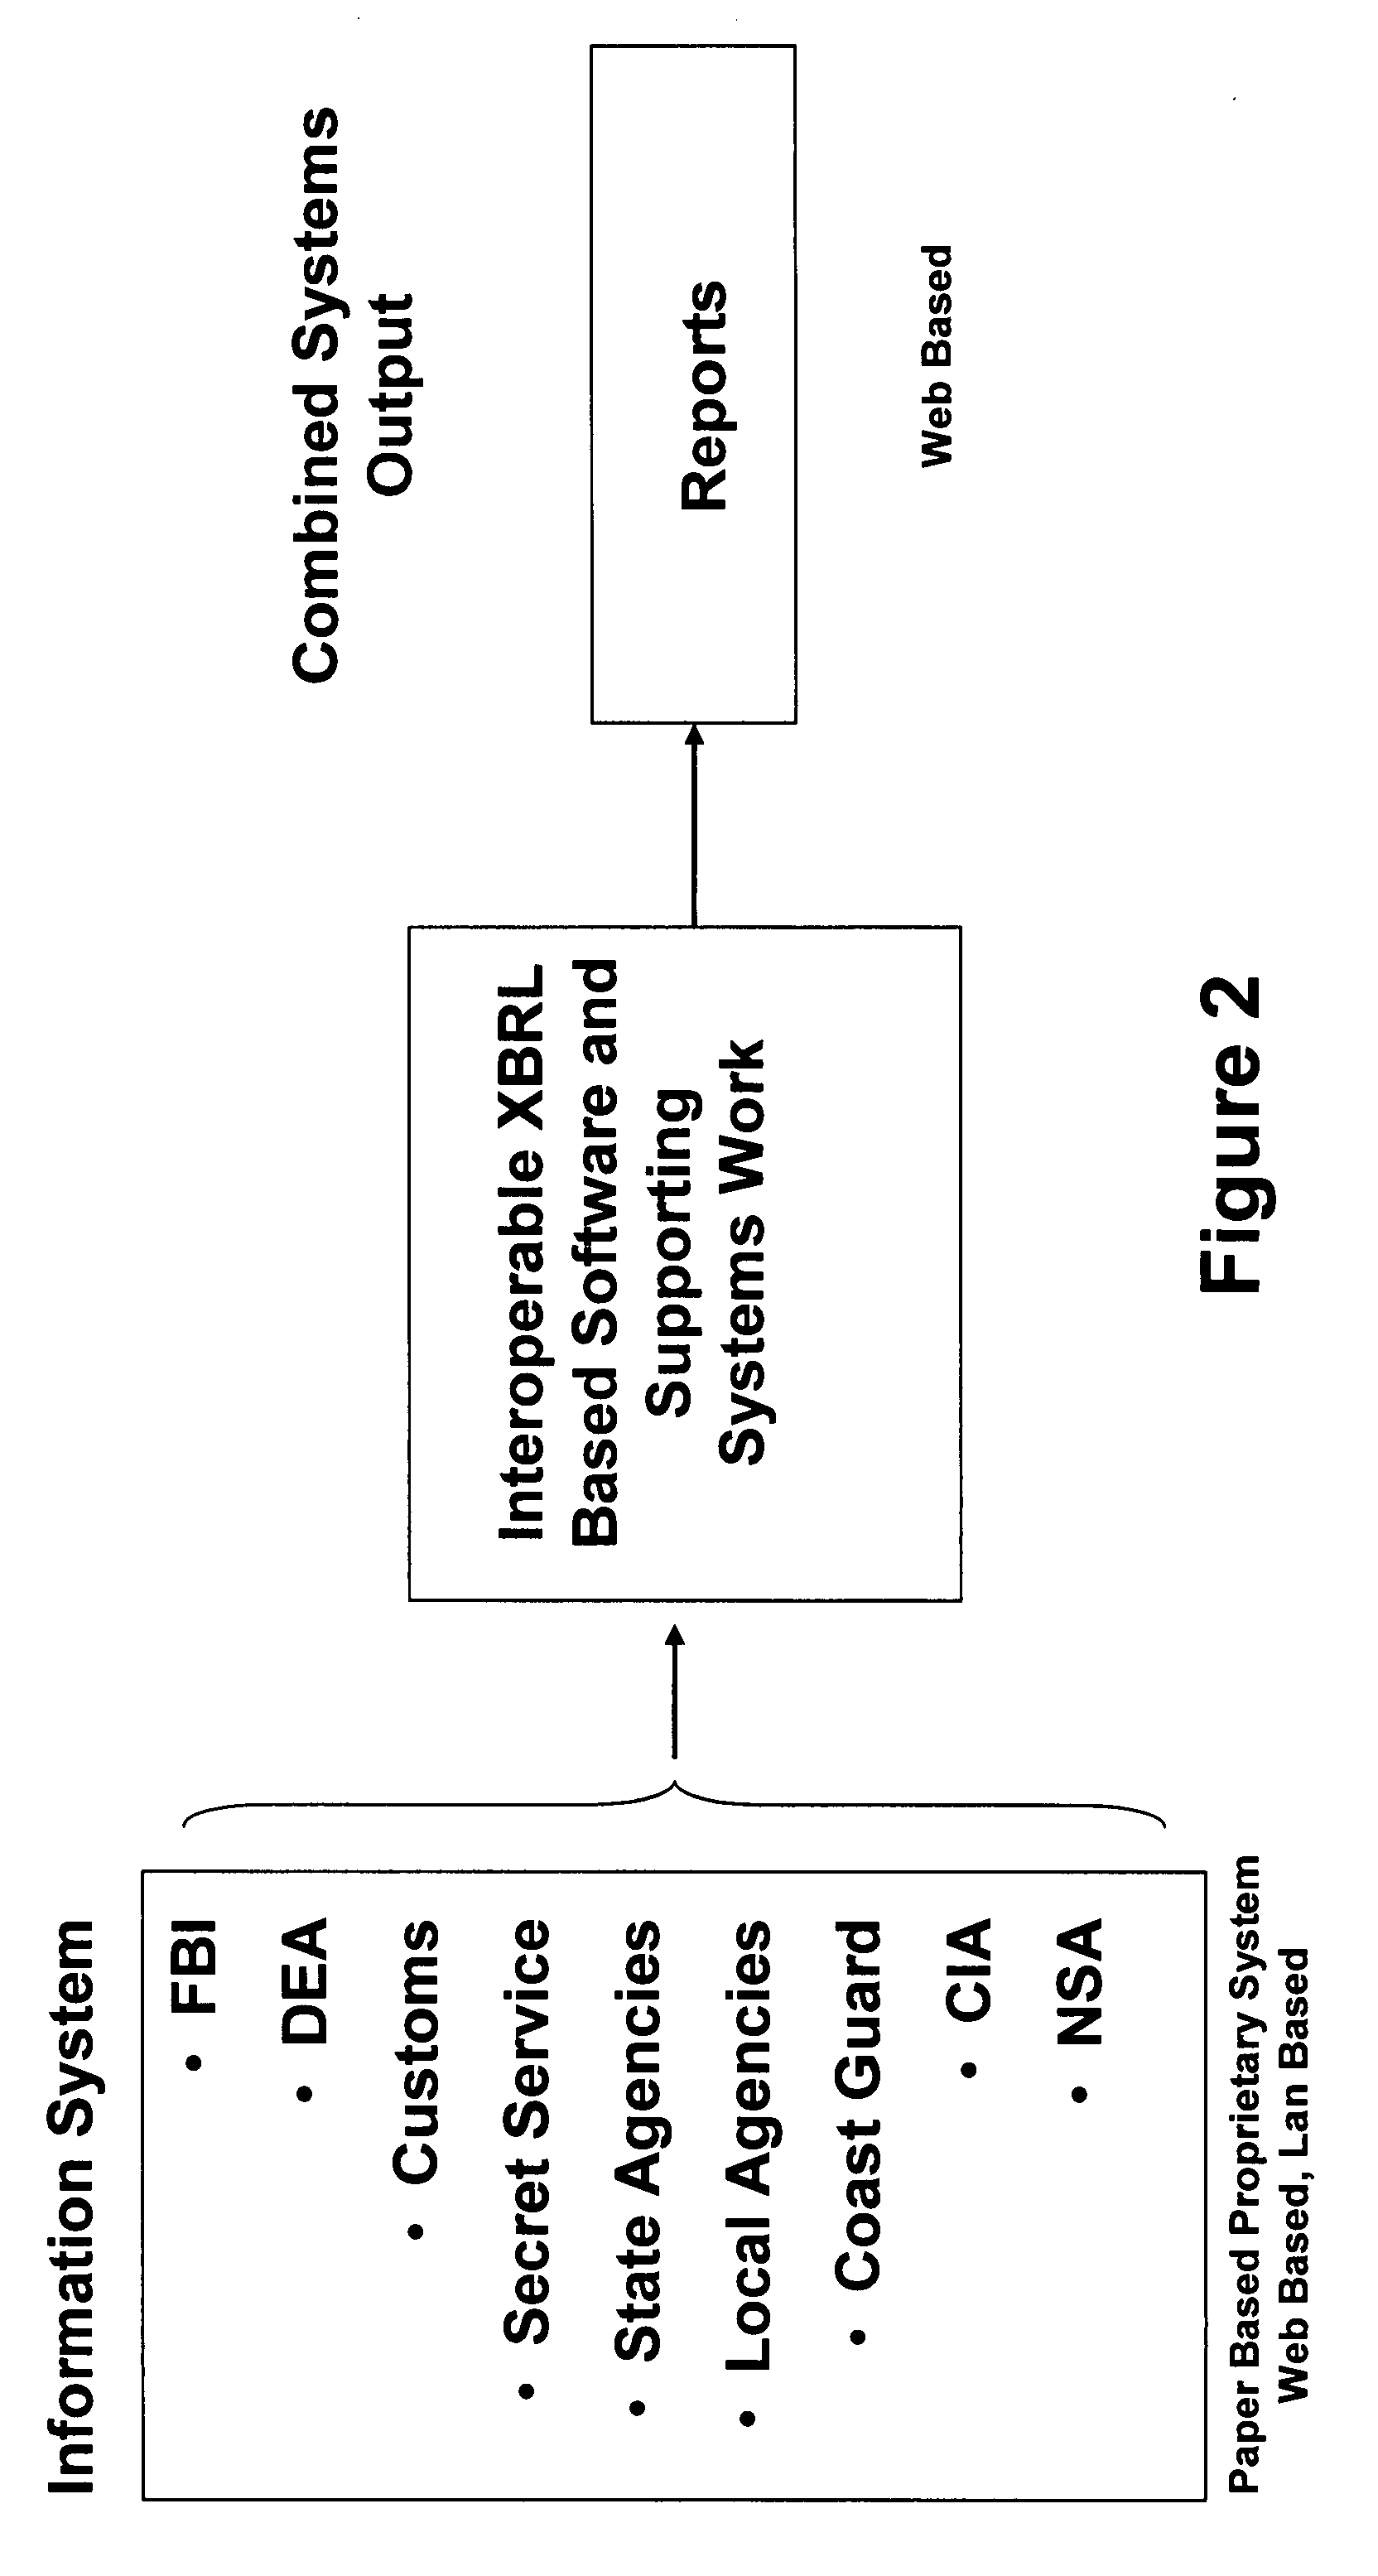 Method, system and computer software for using an XBRL medical record for diagnosis, treatment, and insurance coverage